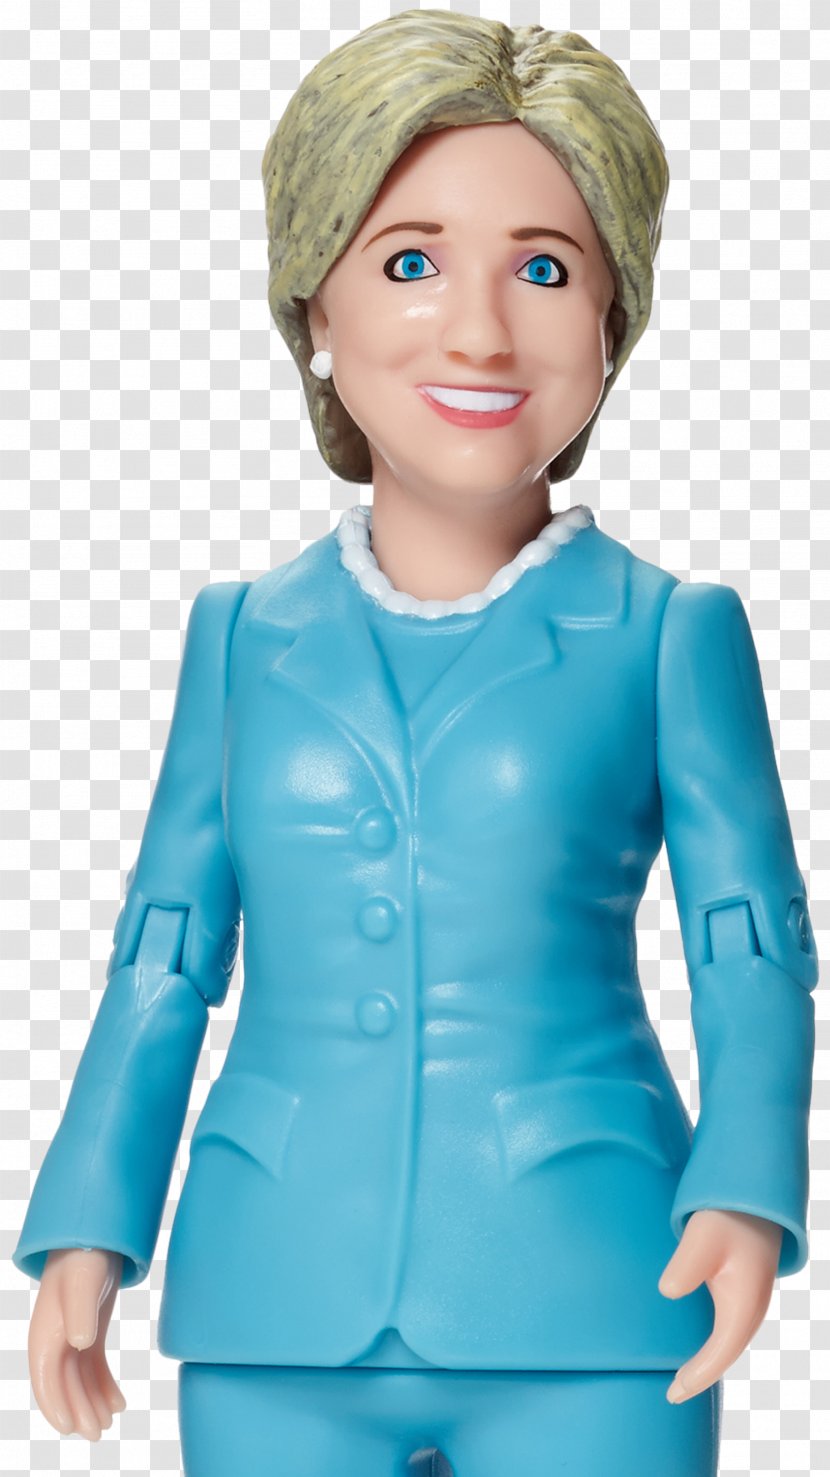 Hillary Clinton White House US Presidential Election 2016 Action & Toy Figures Pant Suits - Cartoon Transparent PNG